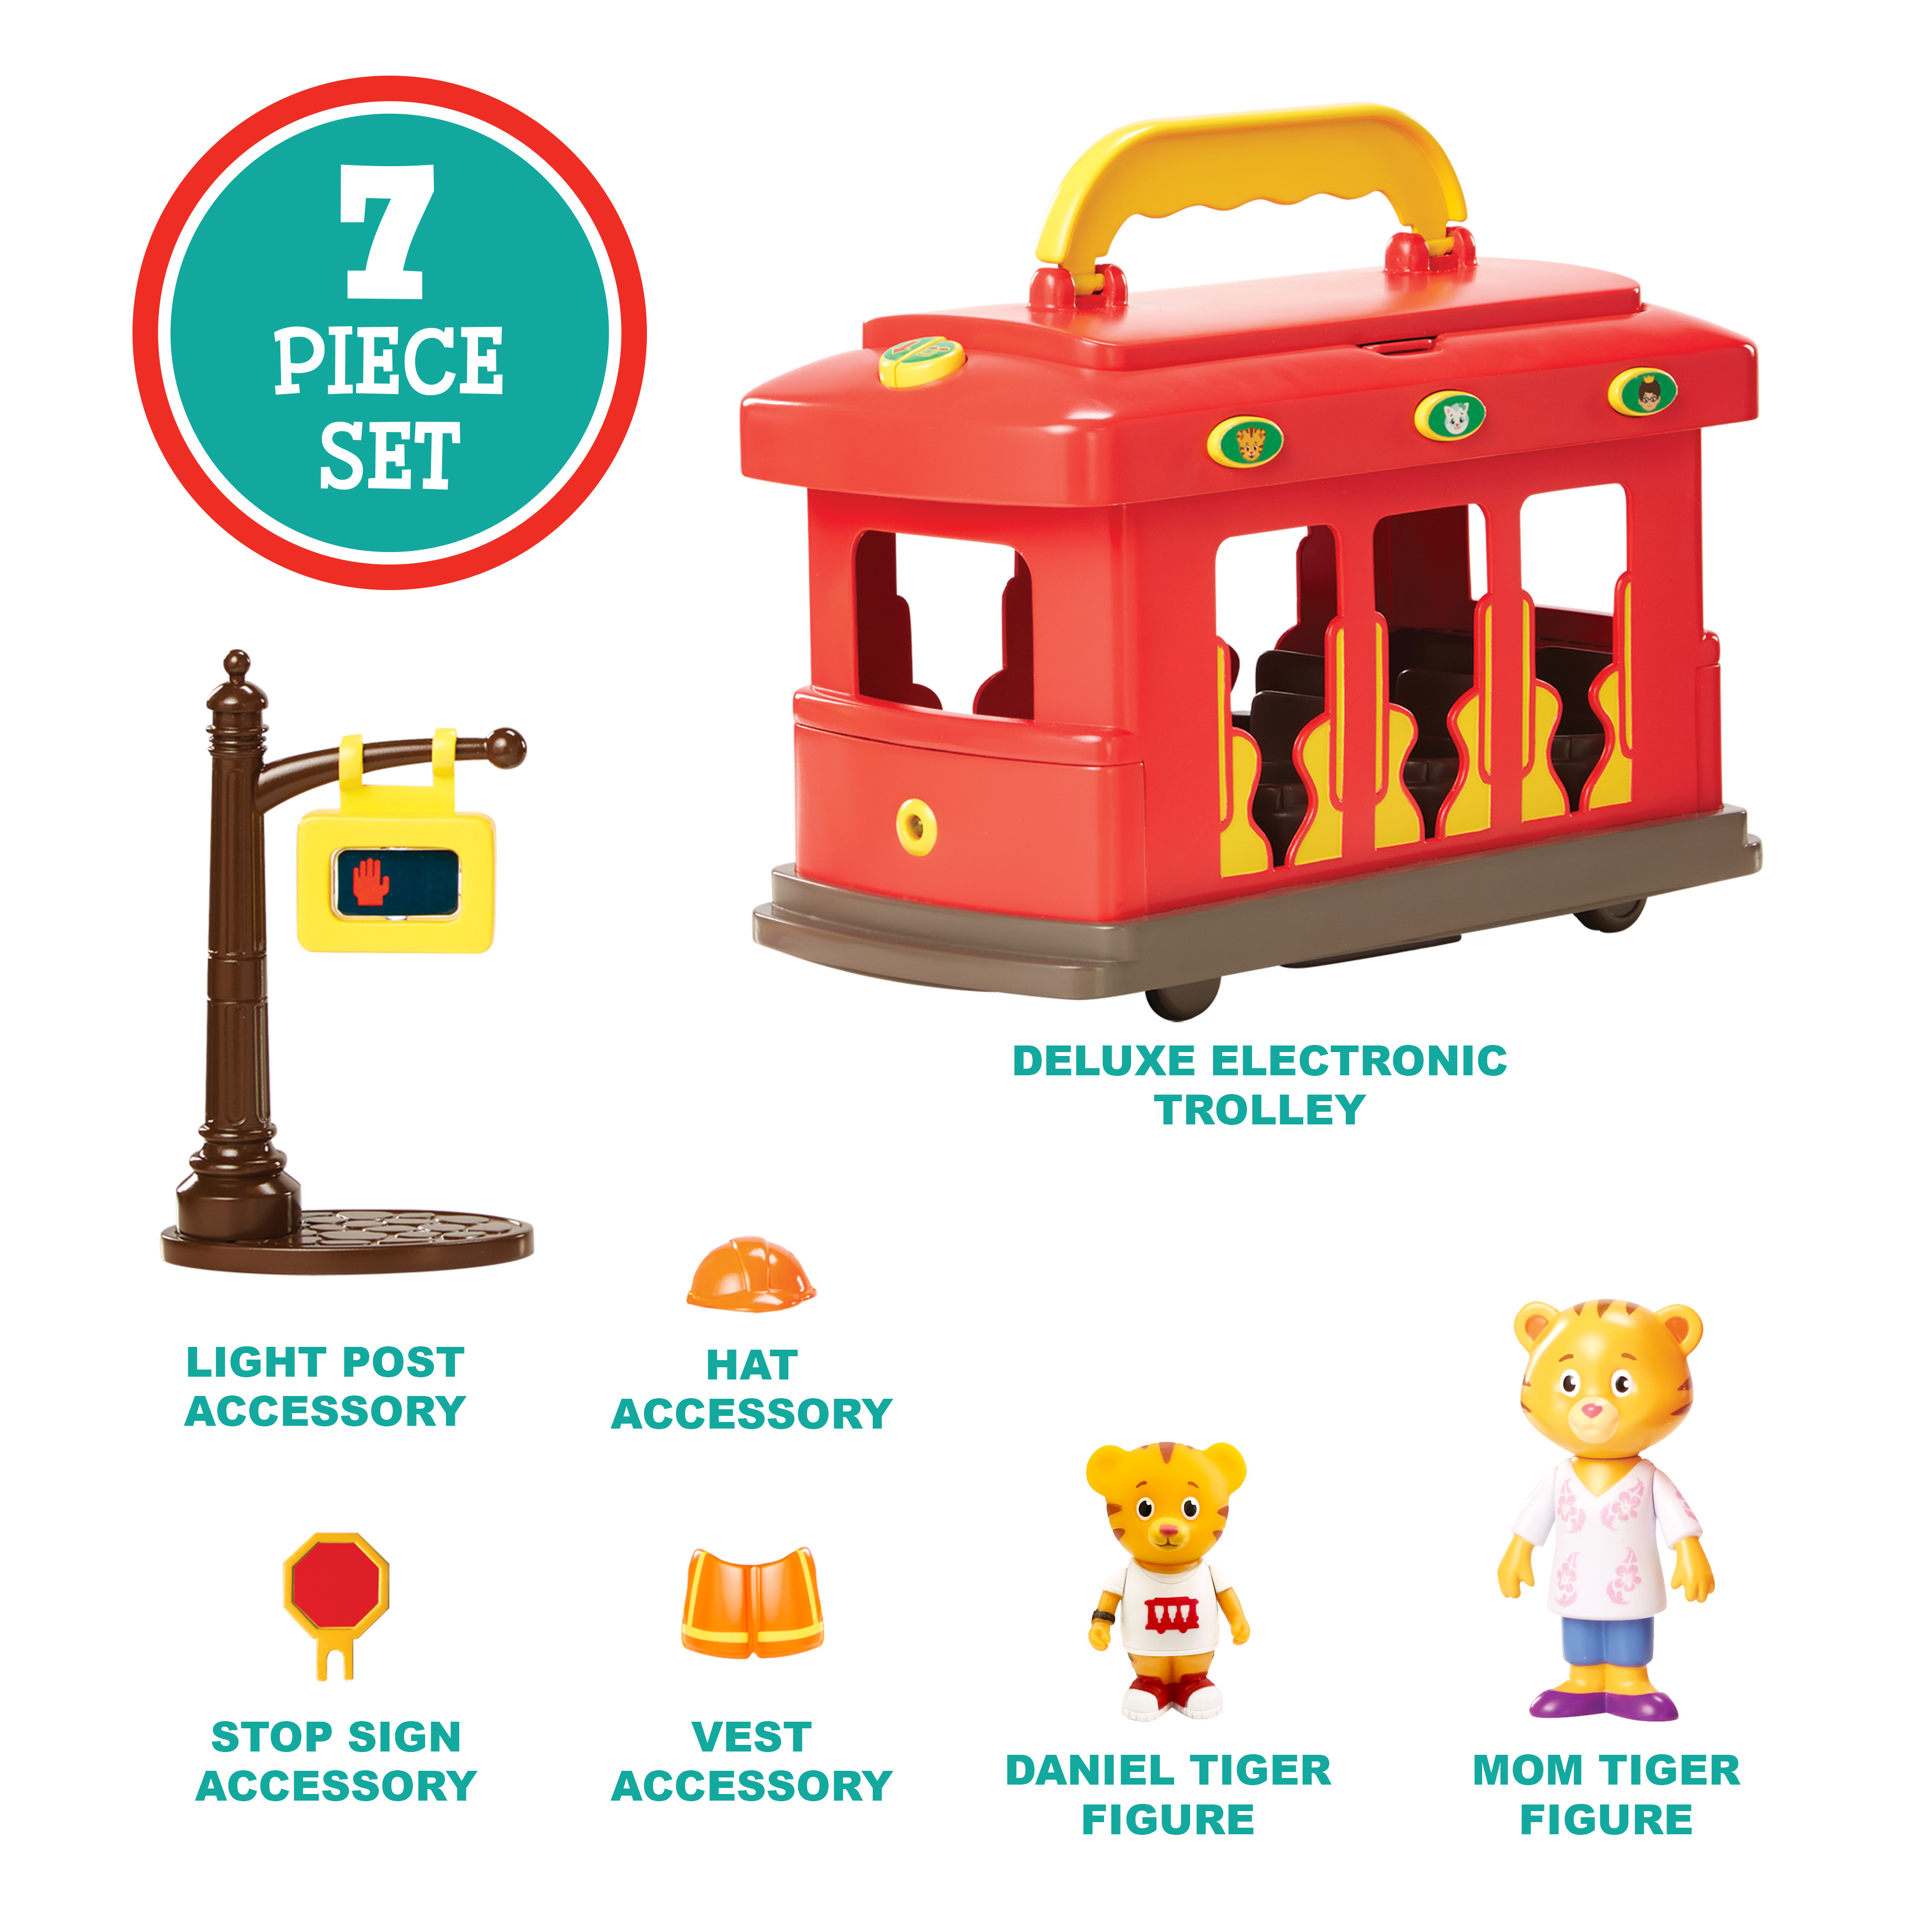 Daniel Tiger's Neighborhood-Deluxe Electronic Trolley Vehicle Car & Truck Play Vehicles' brand Daniel Tiger - image 2 of 8